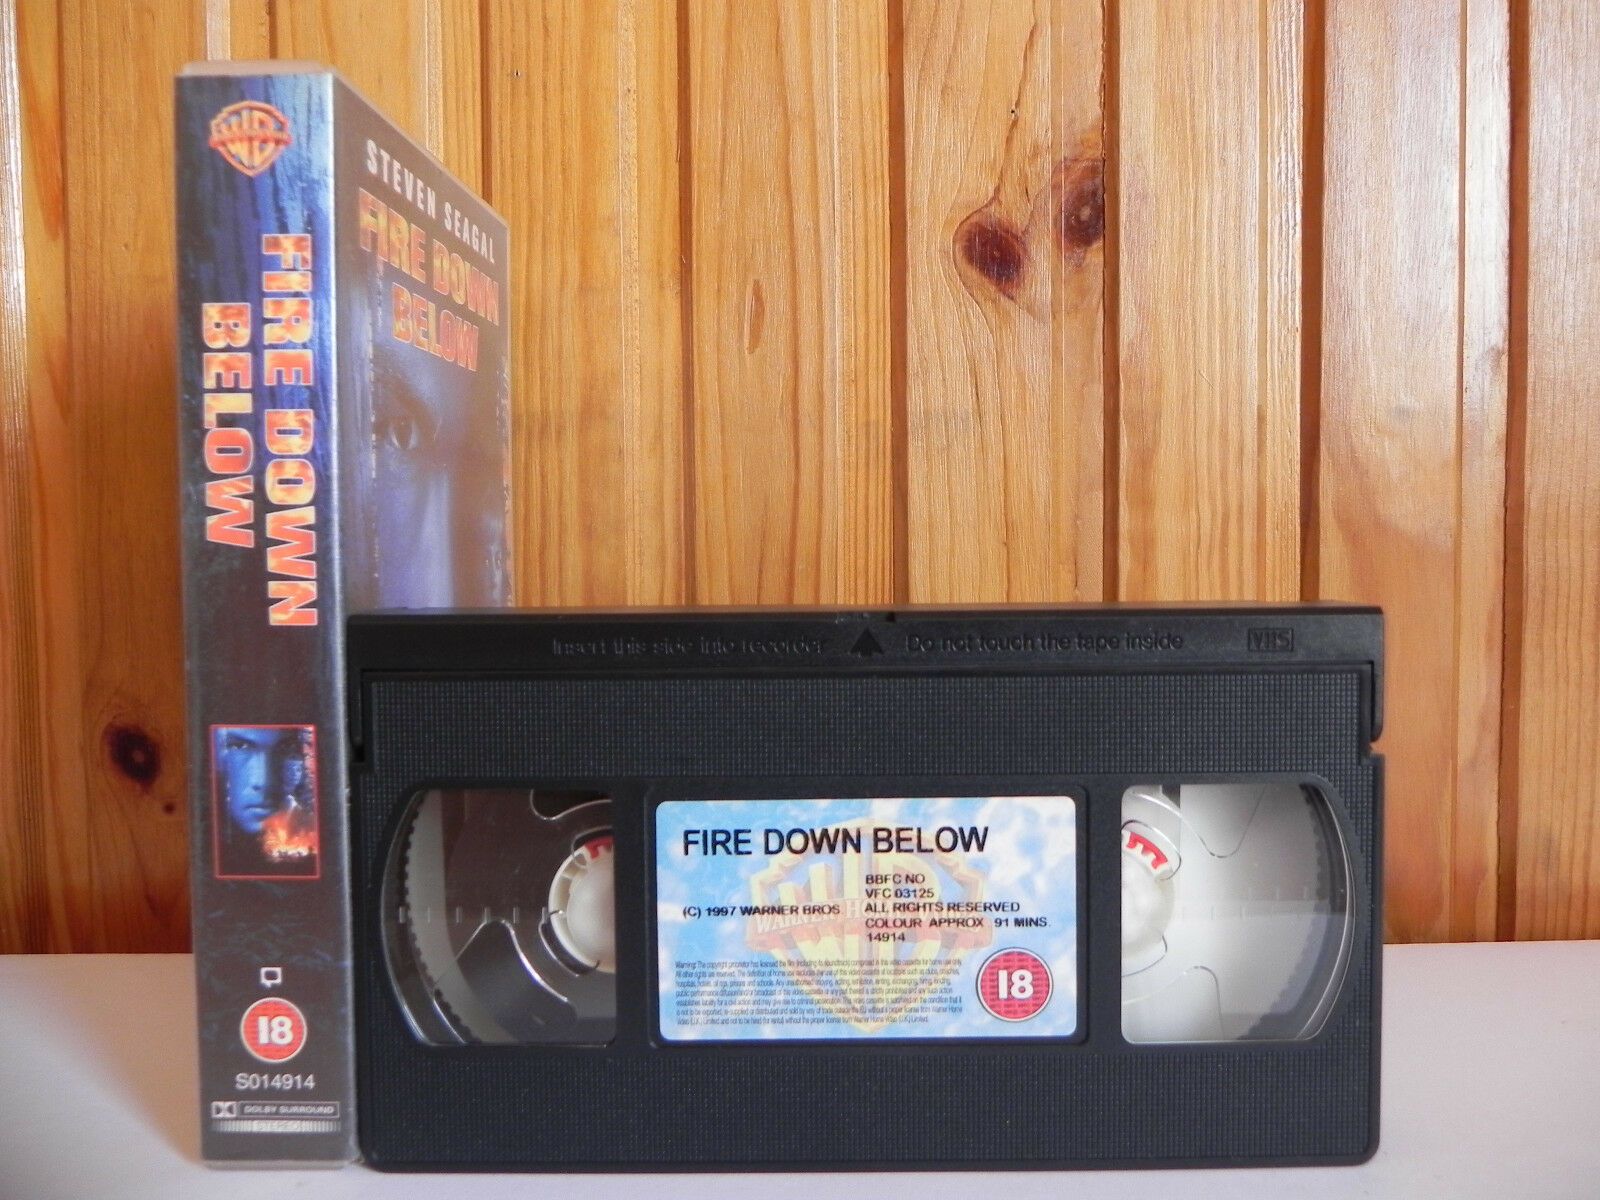 One Man Down Below - Rare Steven Seagal - Warner Brothers - Akido Action - VHS-